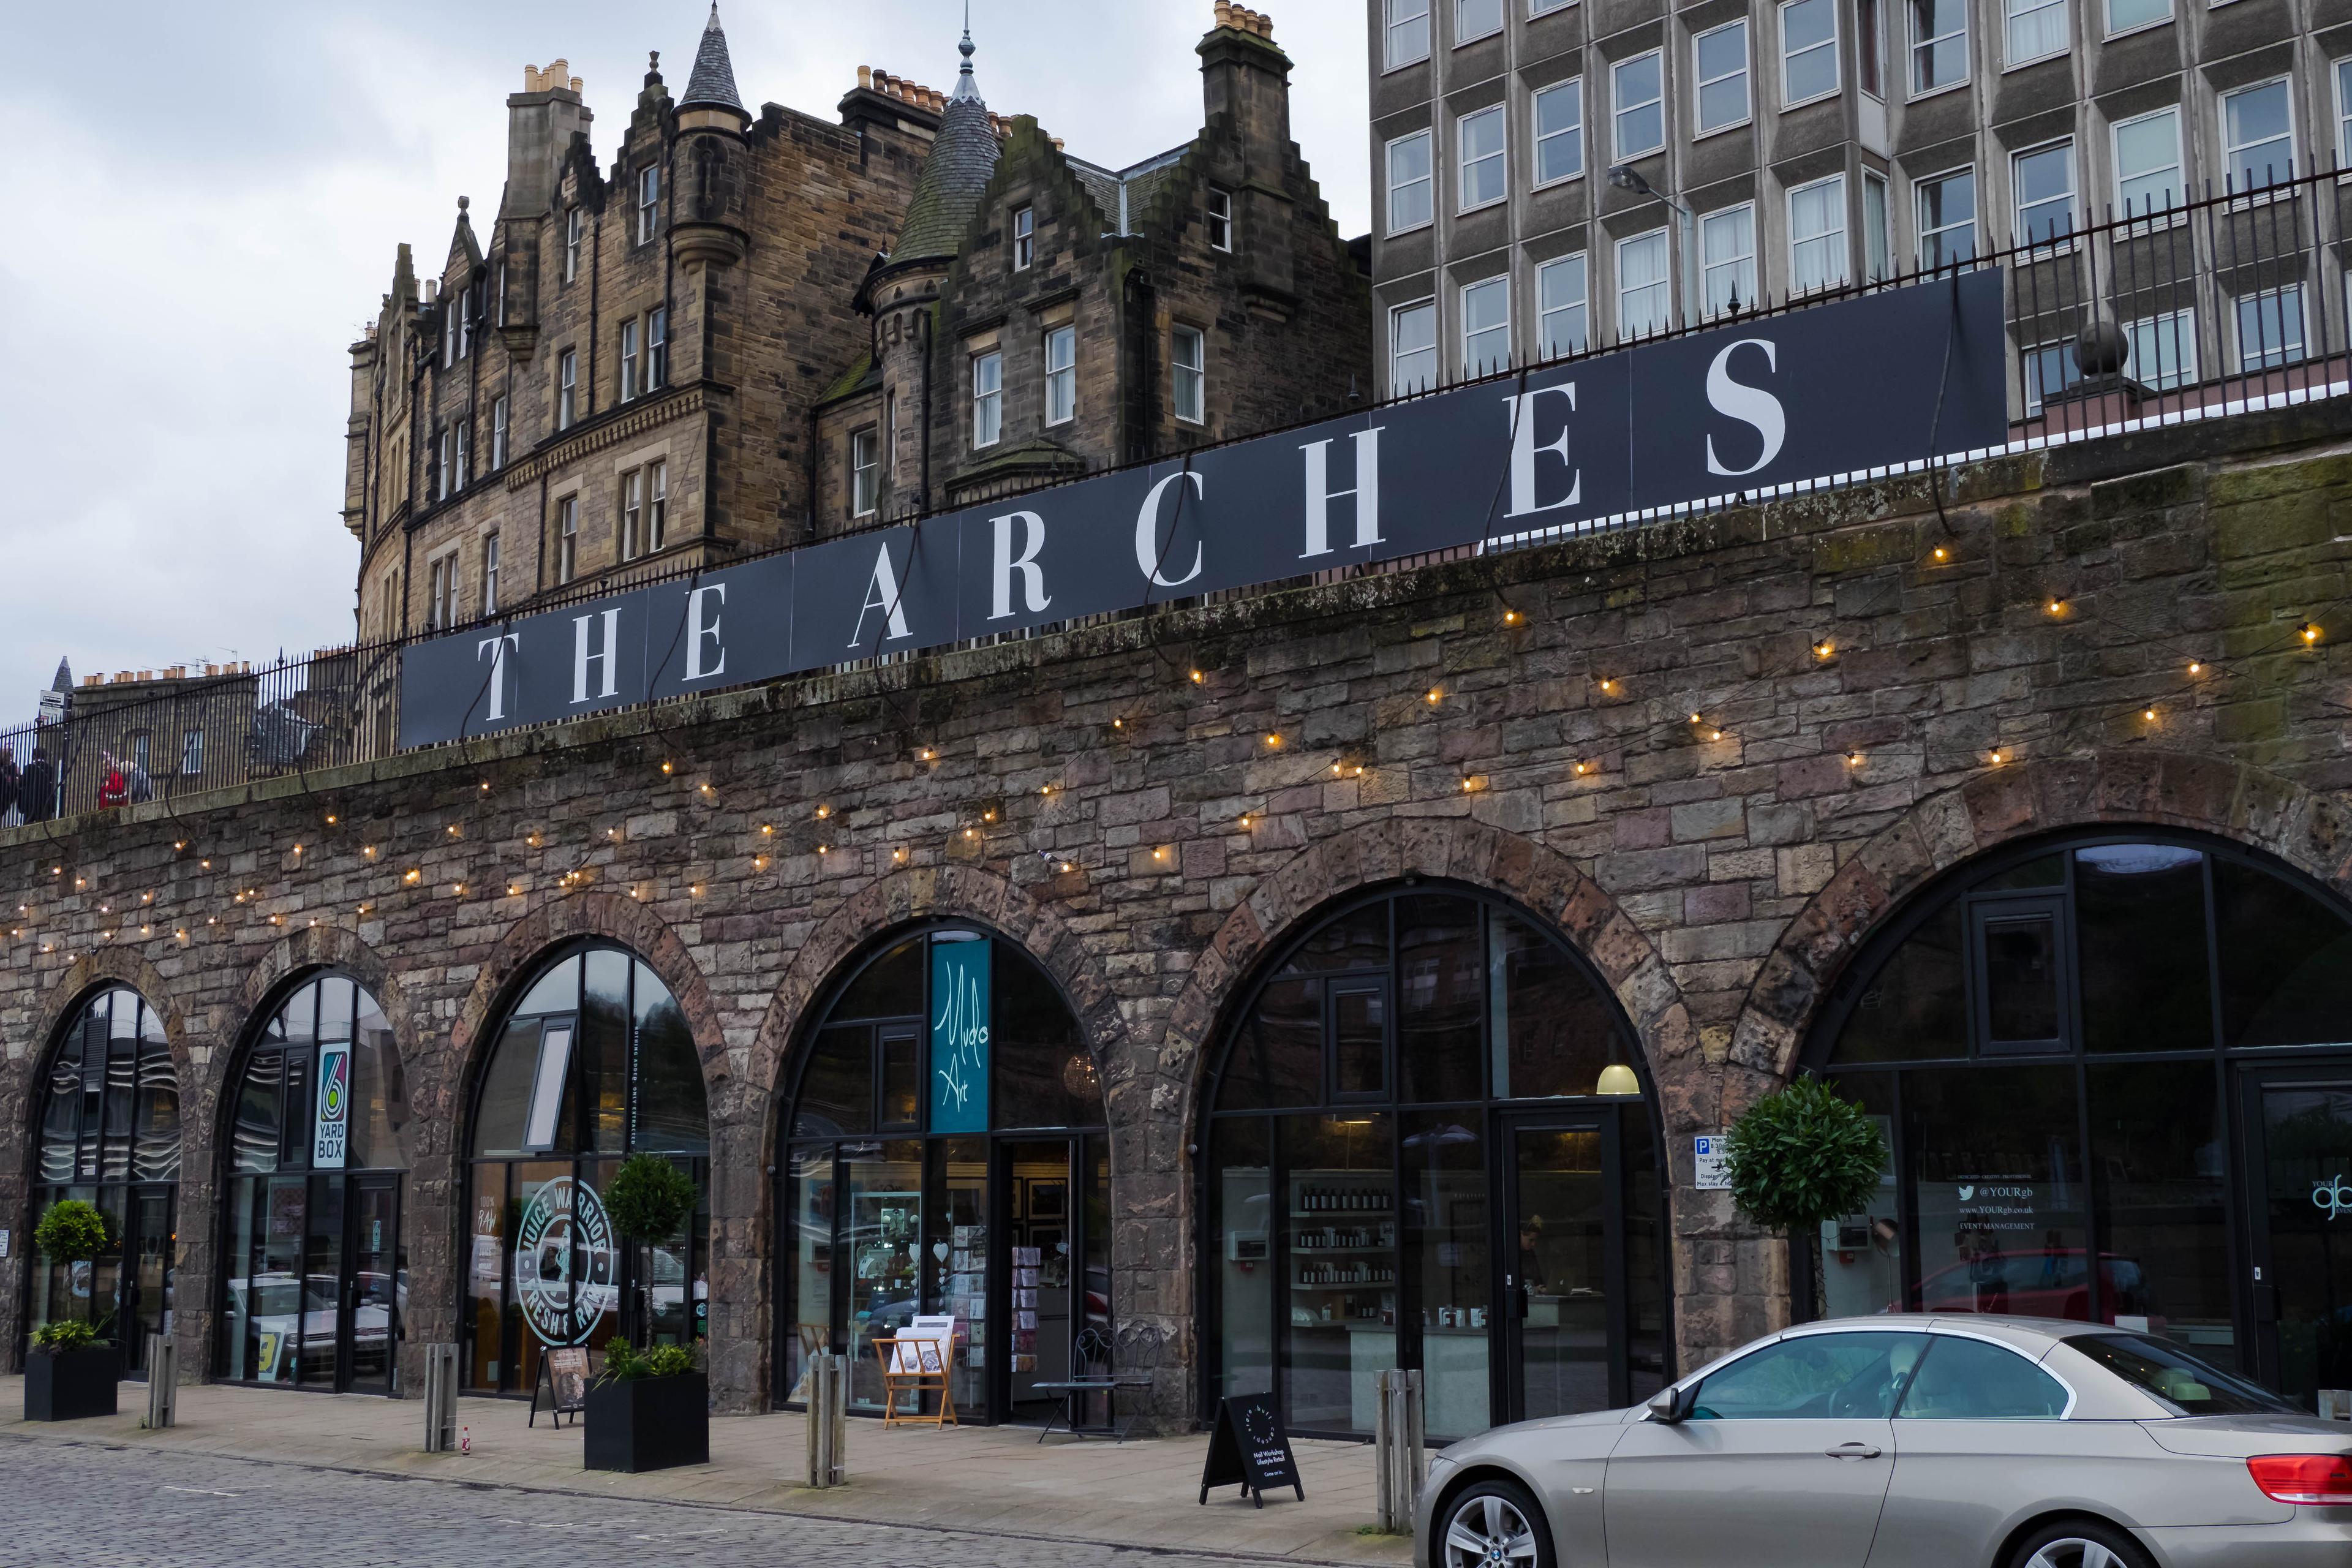 Cover image of this place The Arches